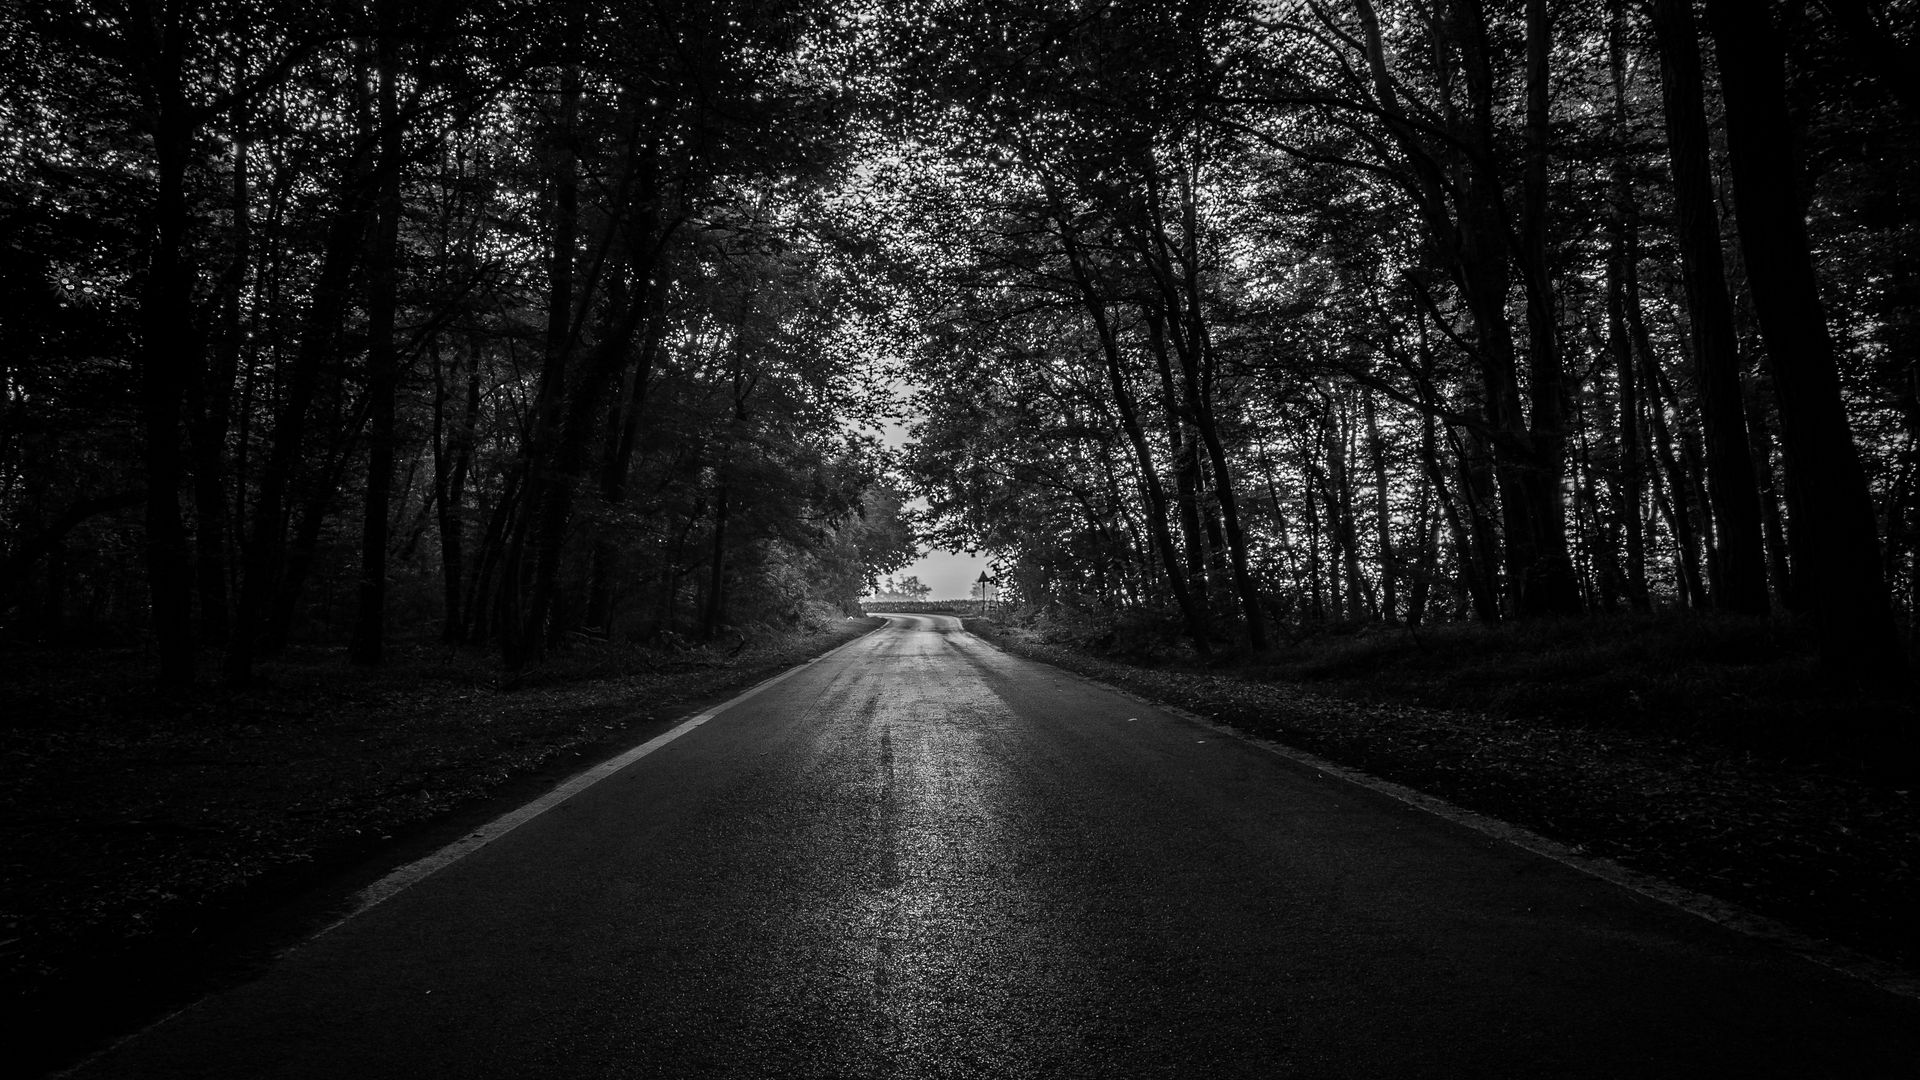 Download wallpaper 1920x1080 road, trees, bw, dark, forest full hd, hdtv,  fhd, 1080p hd background